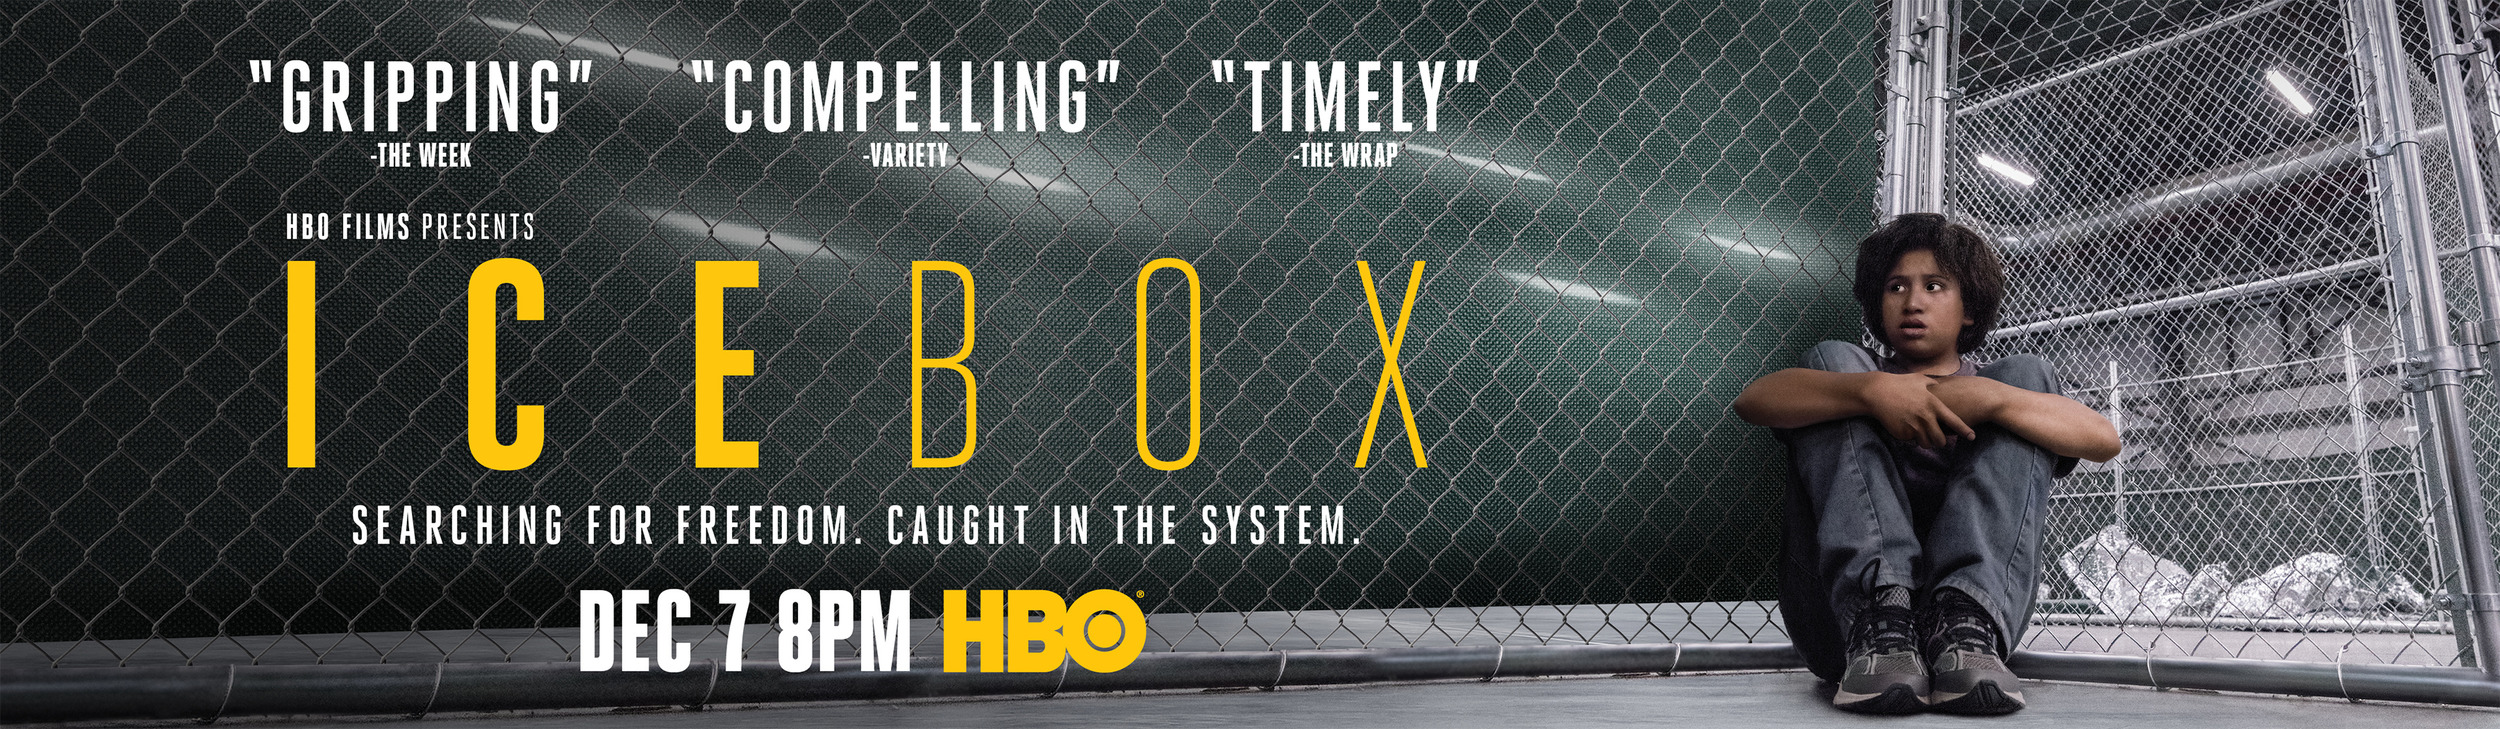 Mega Sized TV Poster Image for Icebox (#2 of 2)